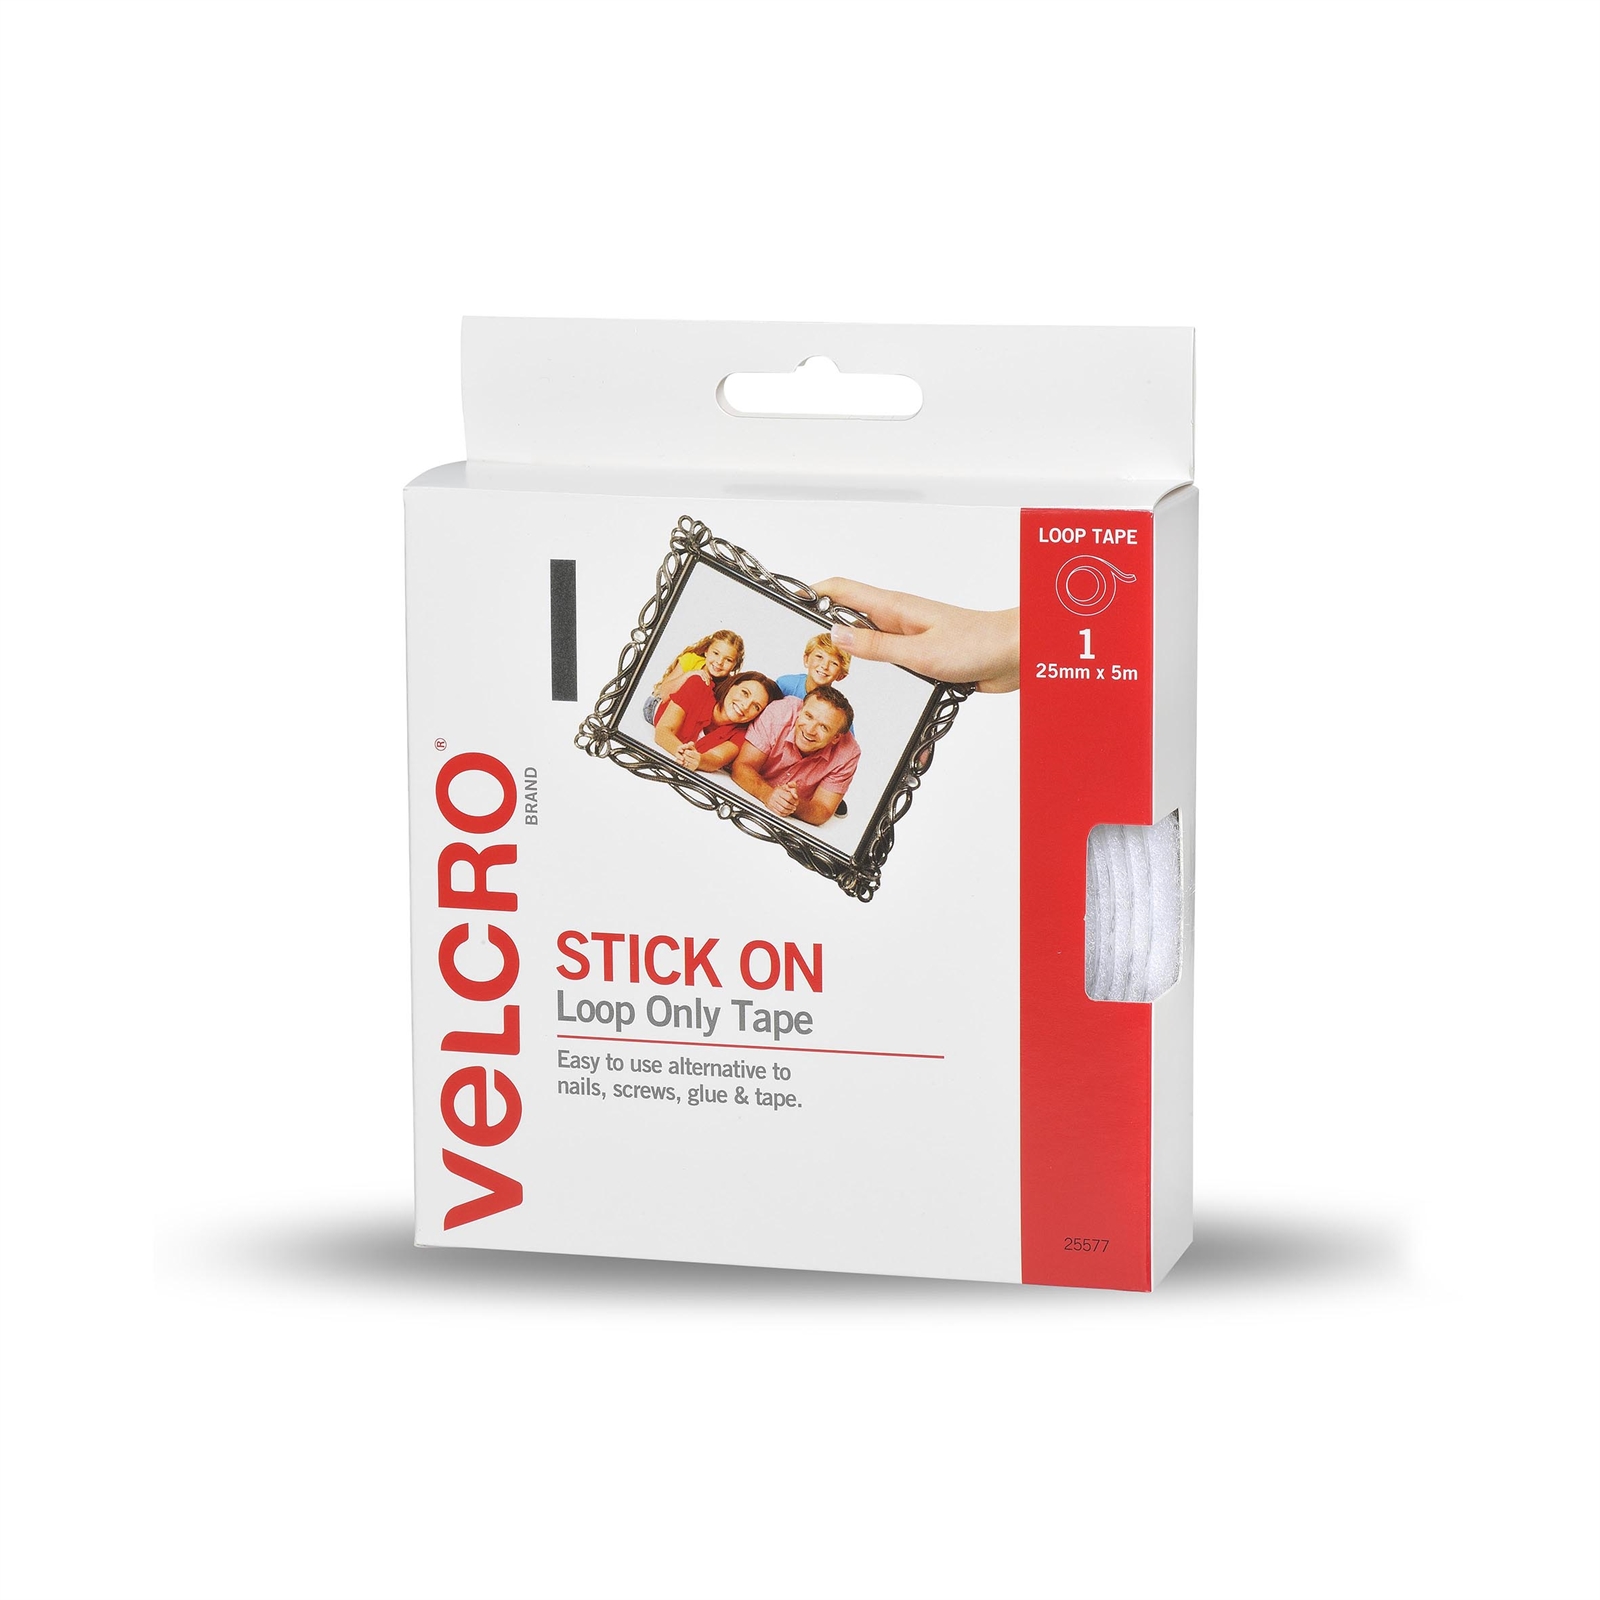 VELCRO® Brand 25mm x 5m White Stick On Loop Only Tape